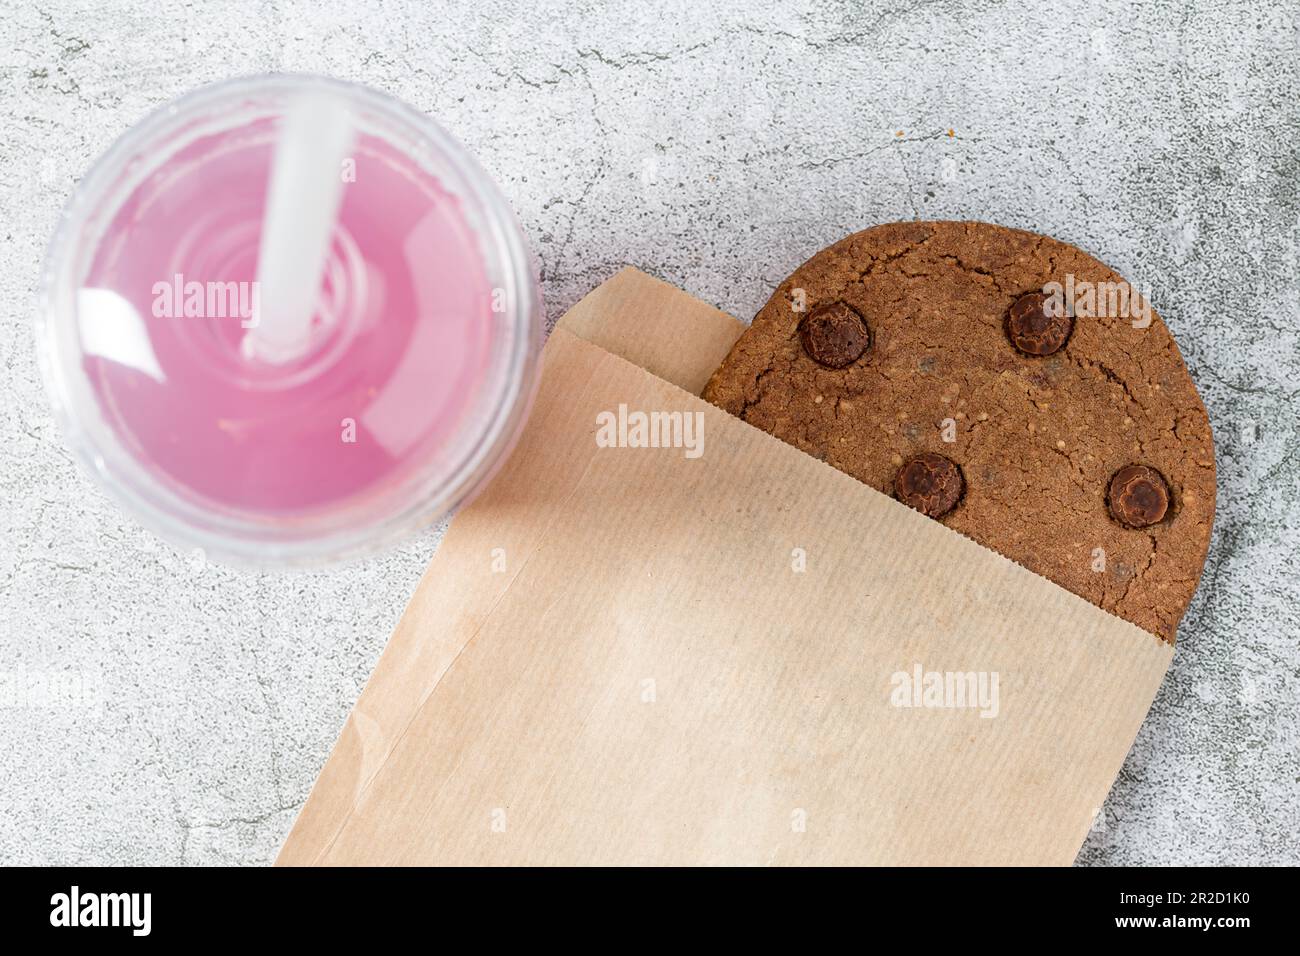 Chocolate chip cookie wrapped in paper bag with drink next to it on stone table Stock Photo